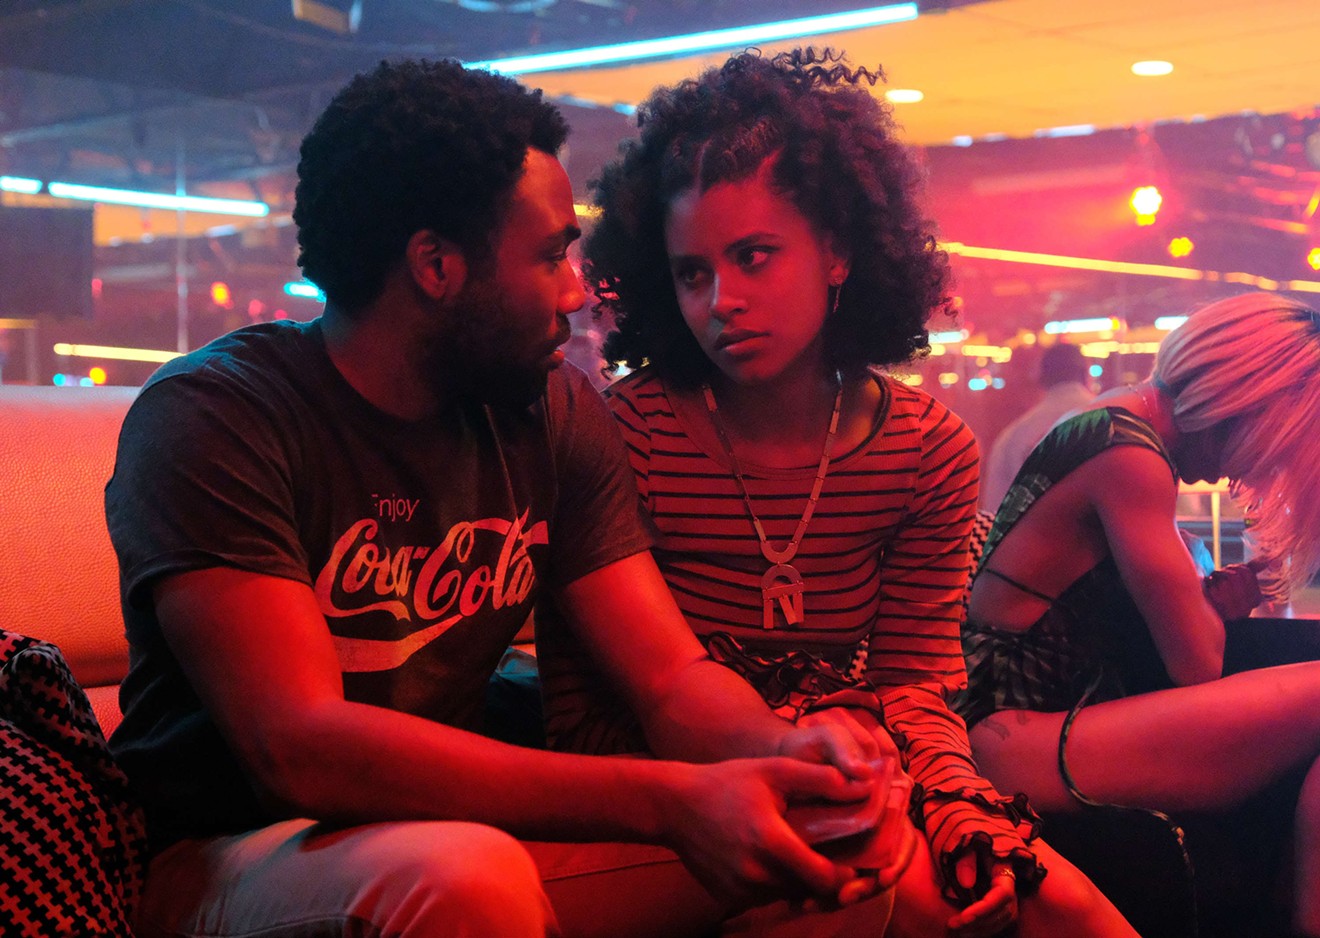 Donald Glover (left), the creator, cowriter and star of the FX series Atlanta, appears in a scene with Zazie Beetz.